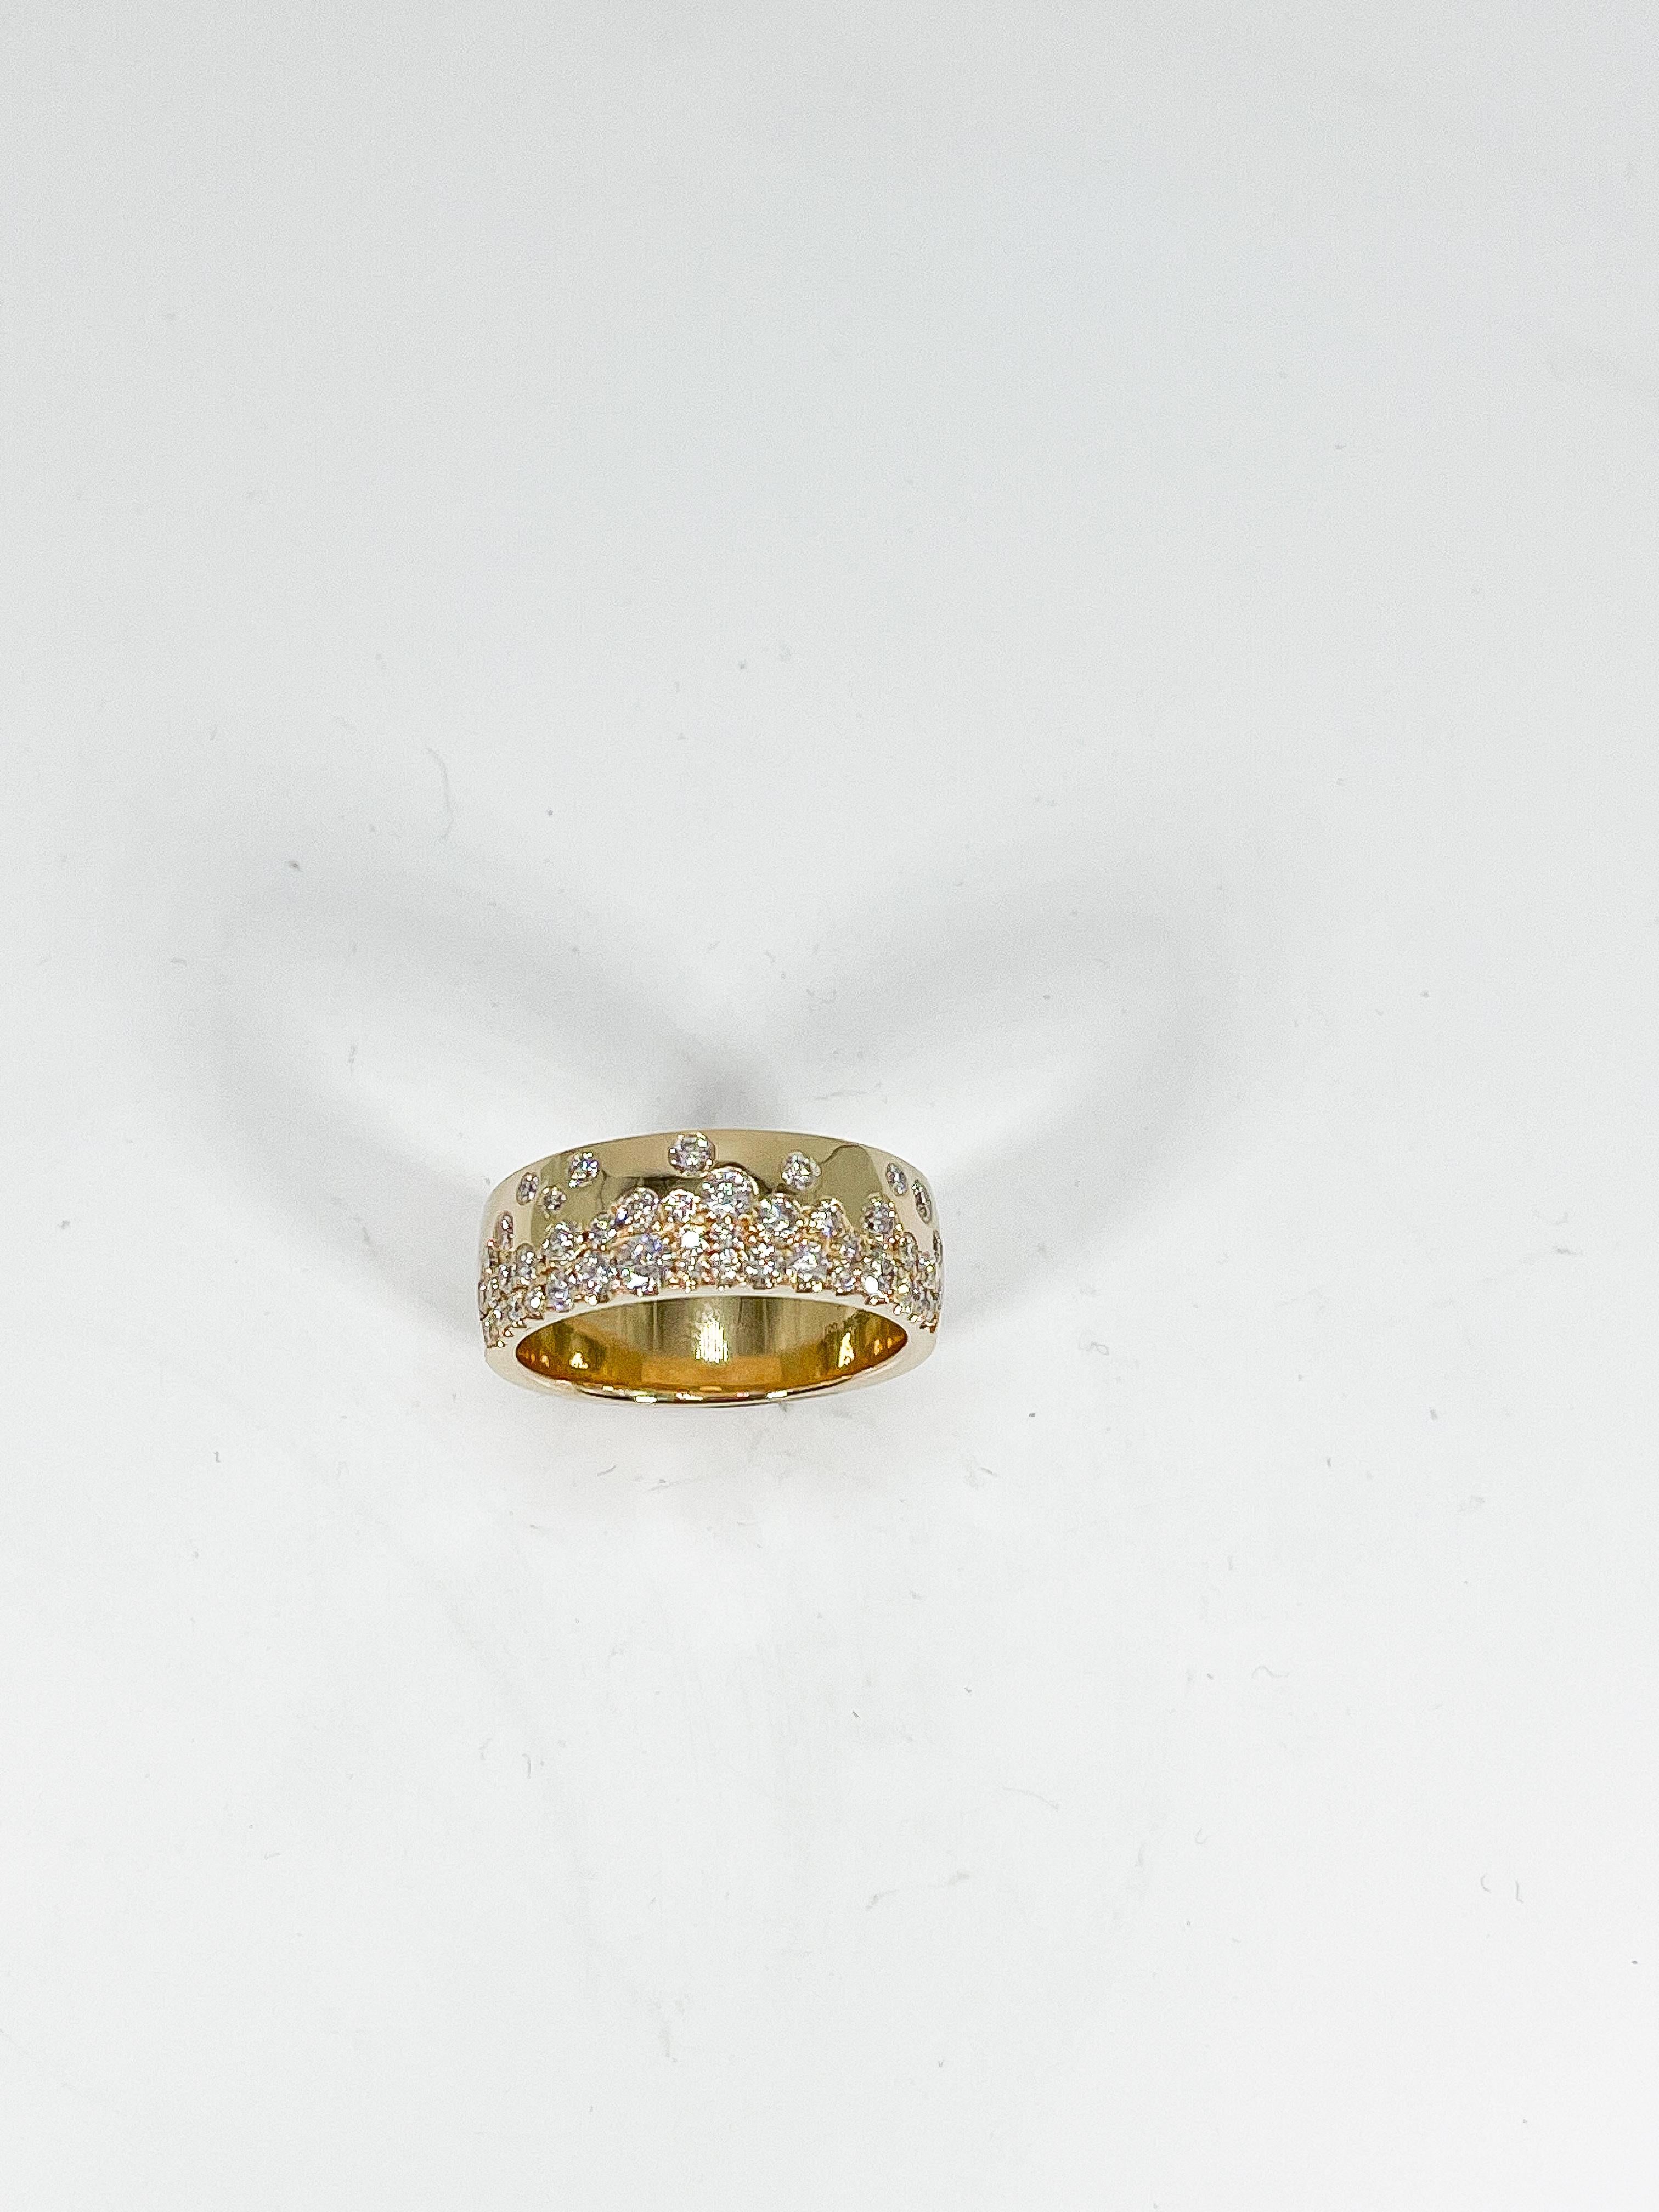 14k yellow gold wide .90 CTW diamond band. Ring has round diamonds varying is size, has a width of 6.9 mm, measures to be a size 7, and has a weight of 7.3 grams.